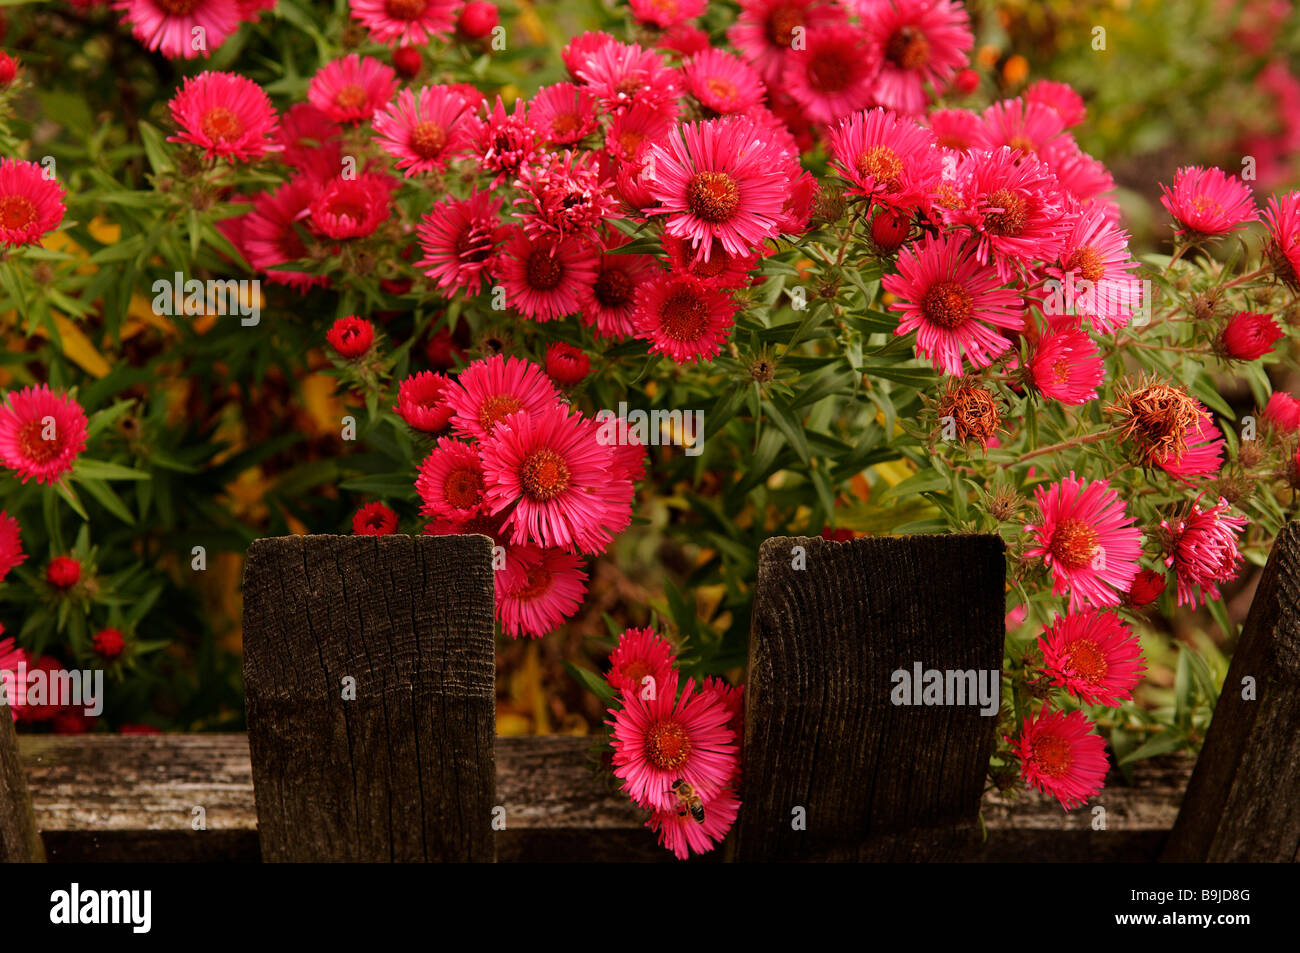 New York Aster (Aster novi-belgii) on a wooden fence Stock Photo